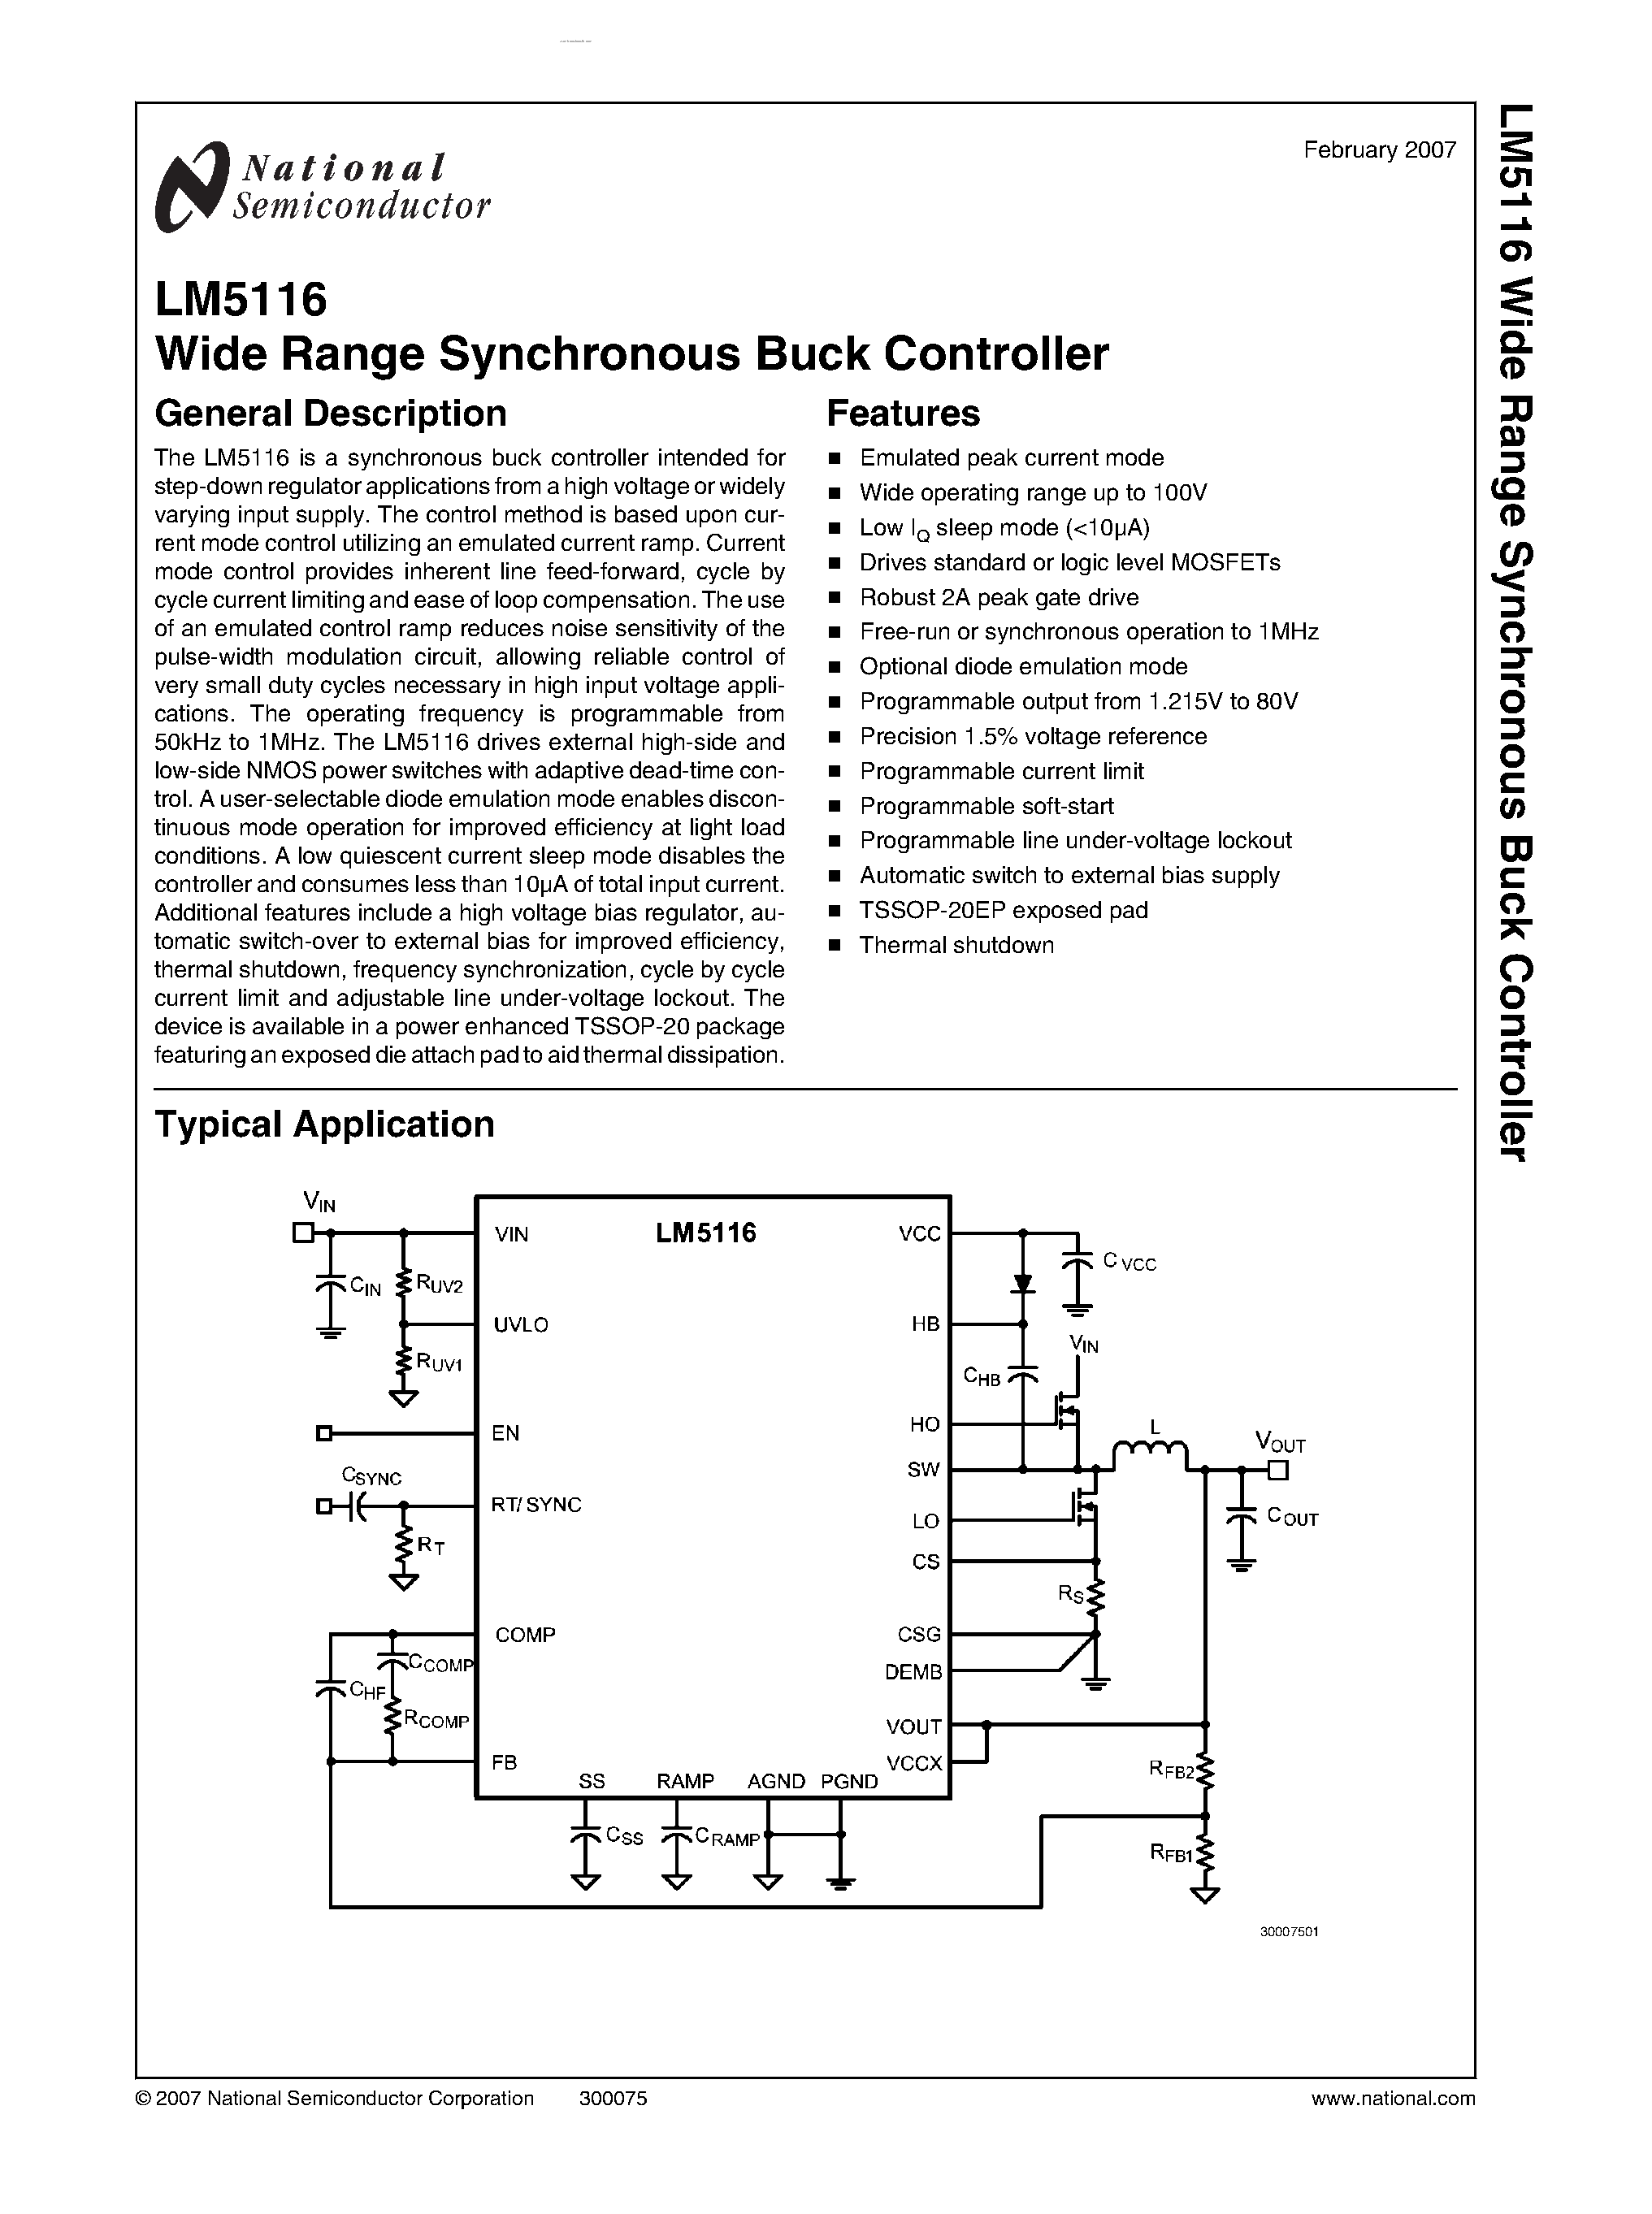 Datasheet LM5116 - Wide Range Synchronous Buck Controller page 1